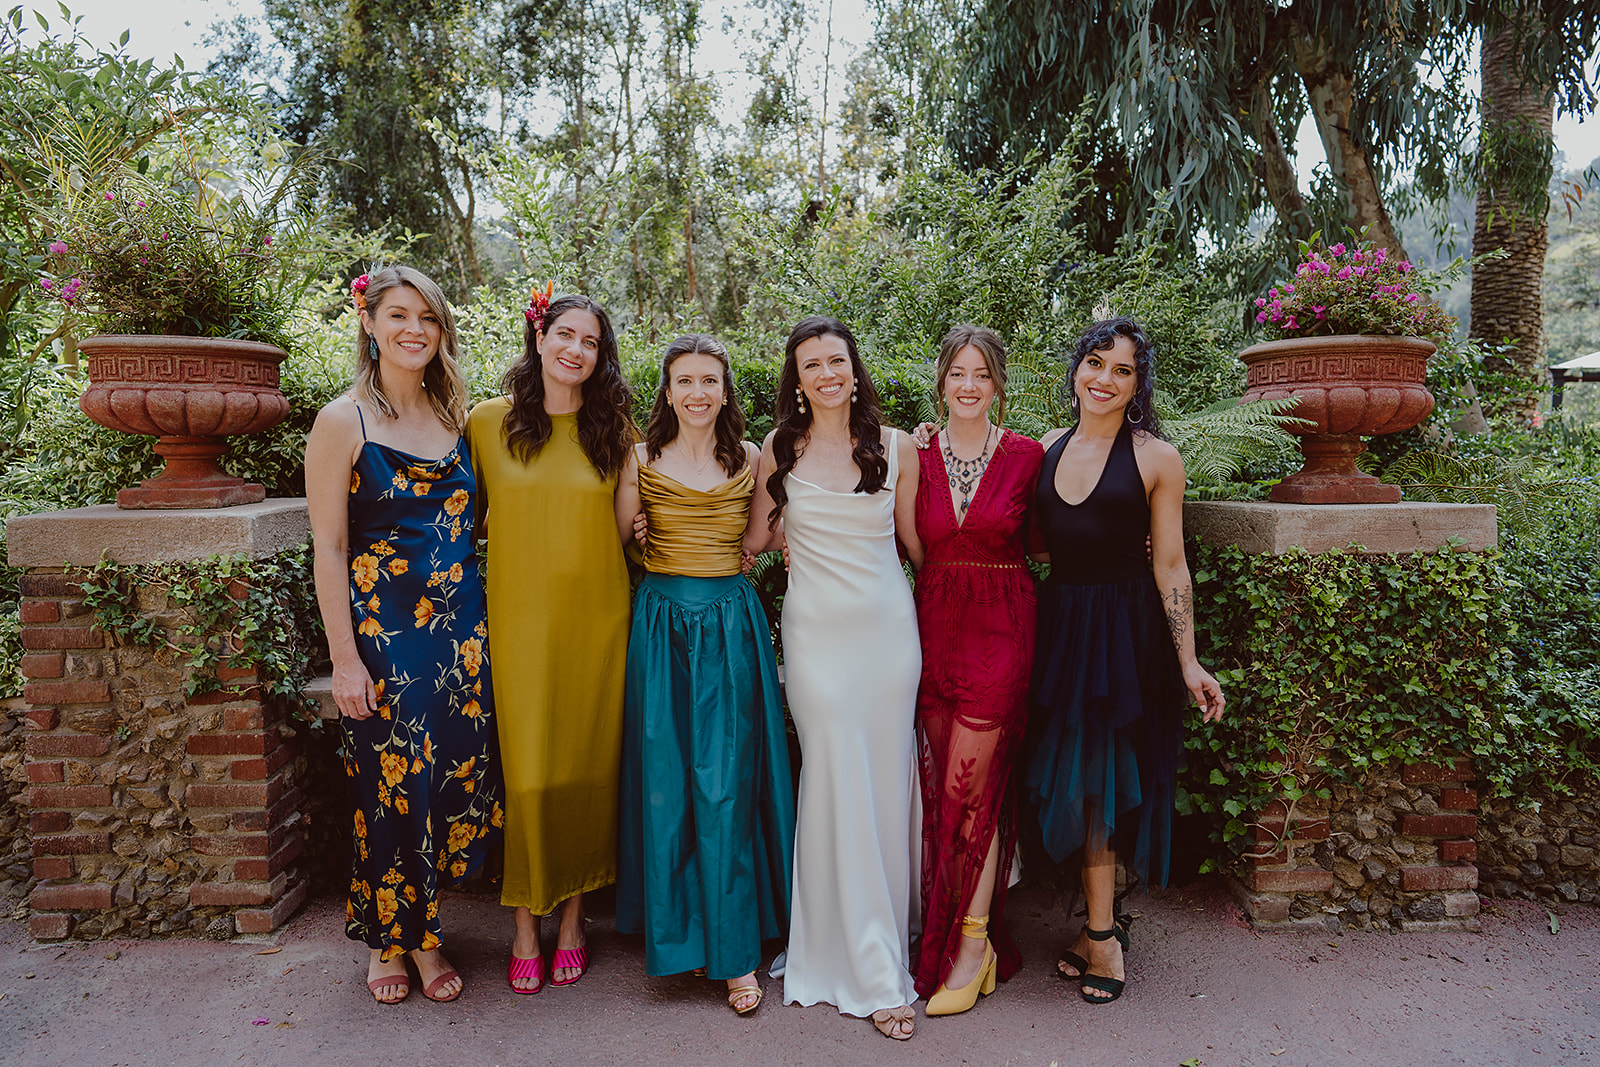 minimalist bride in silk wedding dress stands with bridesmaids in colorful mixed dresses